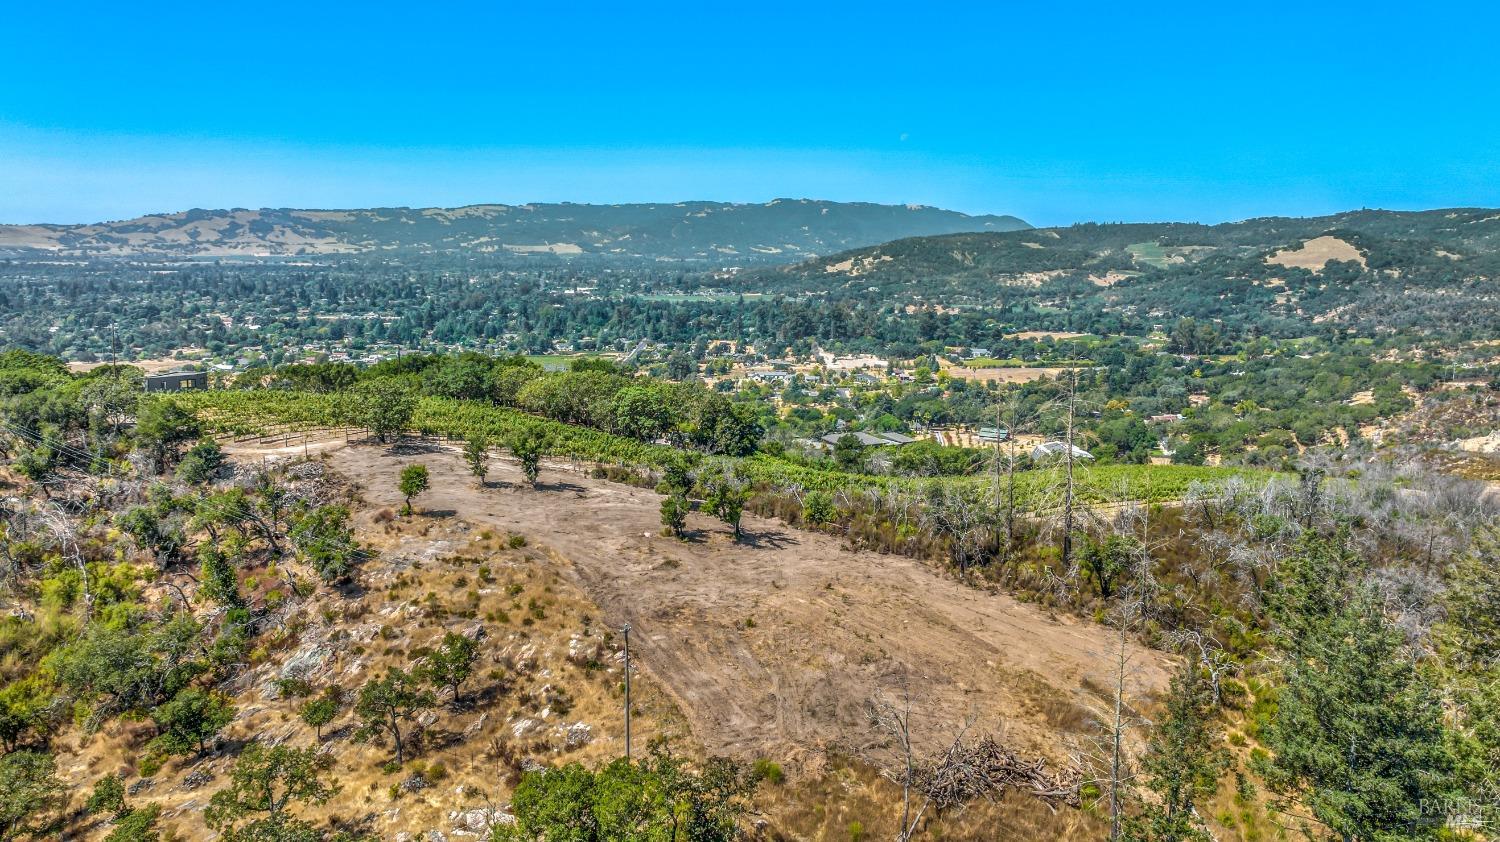 Gorgeous views from gated and fence 5.25+- acre parcel with cleared building site, almost 360' view. New well, 3-bedroom vested Adobe Associates septic system design, electricity. Bonus: Newer barn with corrals and an arena. East side Sonoma minutes to town.